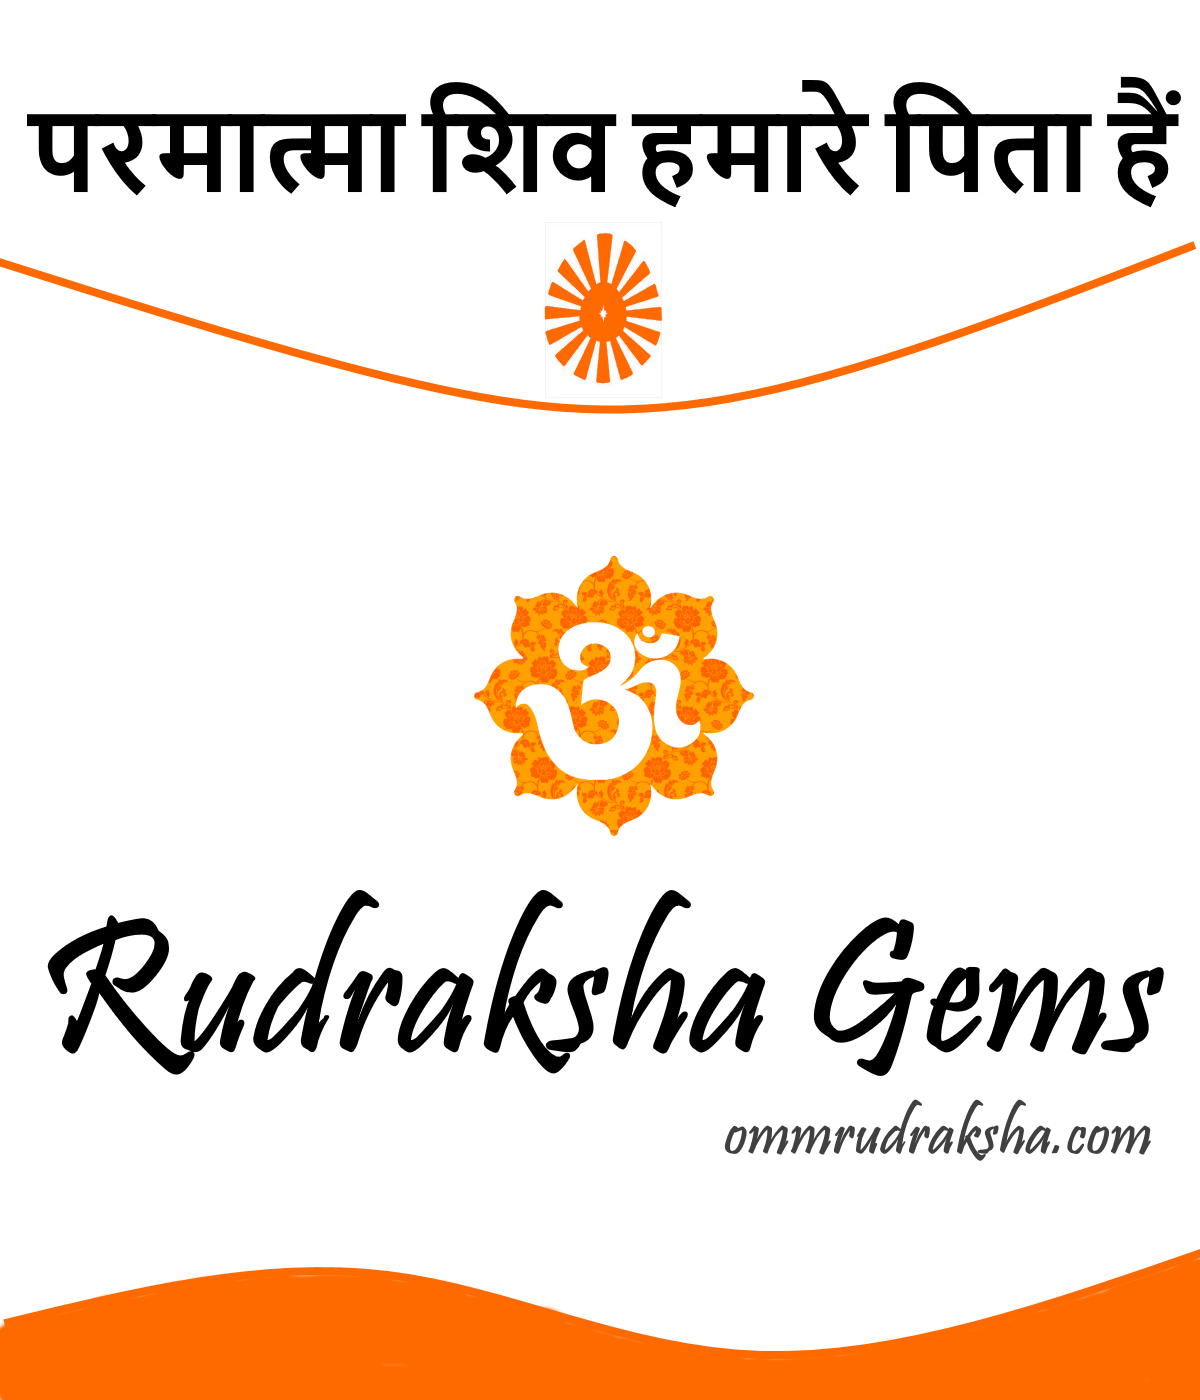 Rudraksha term is used both for the berries themselves and as a term